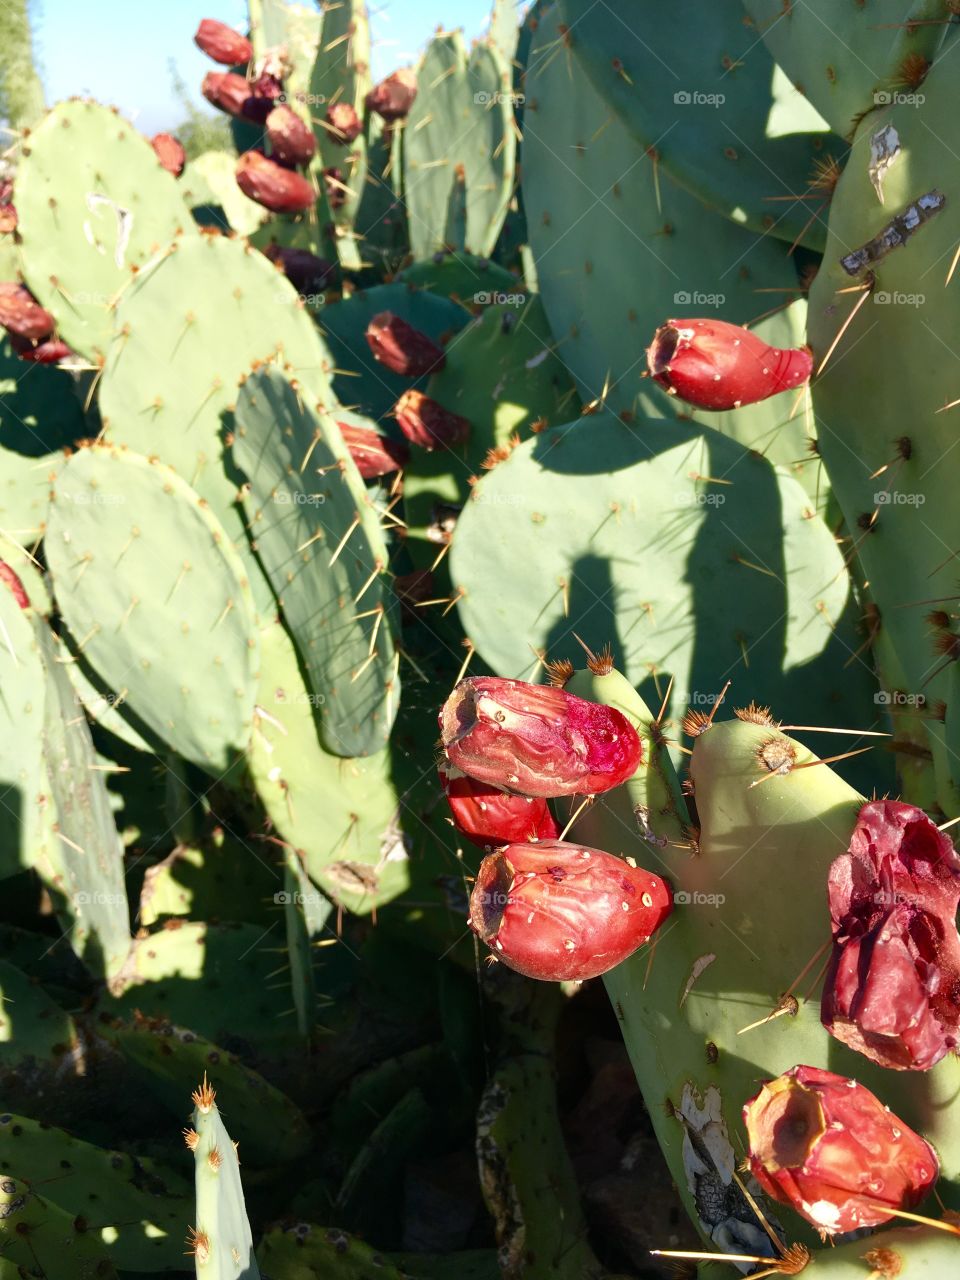 Prickly pear cactus and fruit 